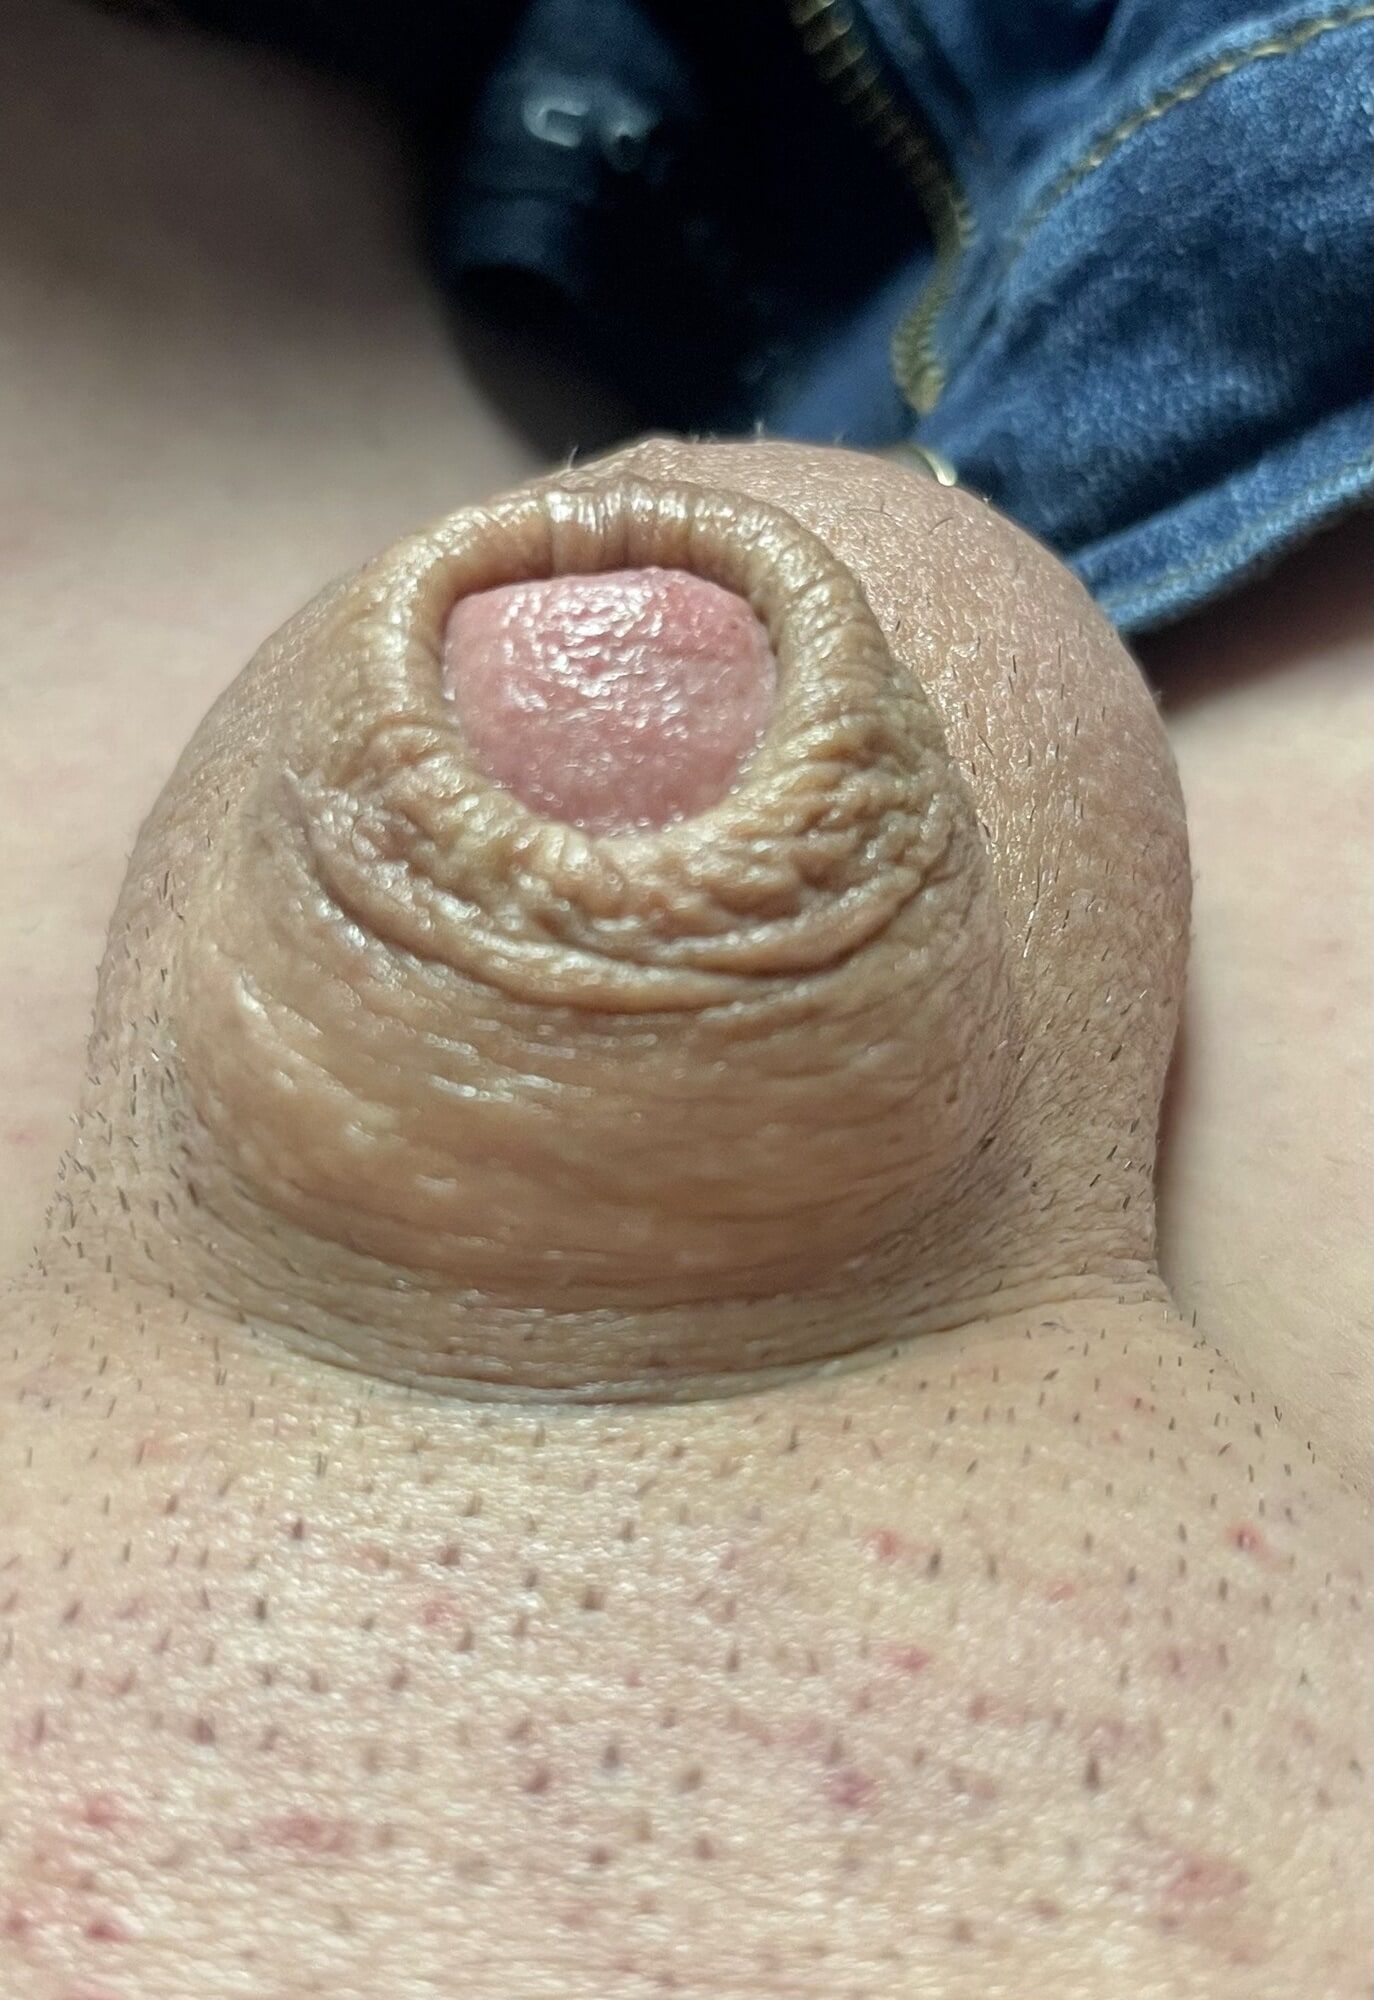 Inverted tiny penis #2